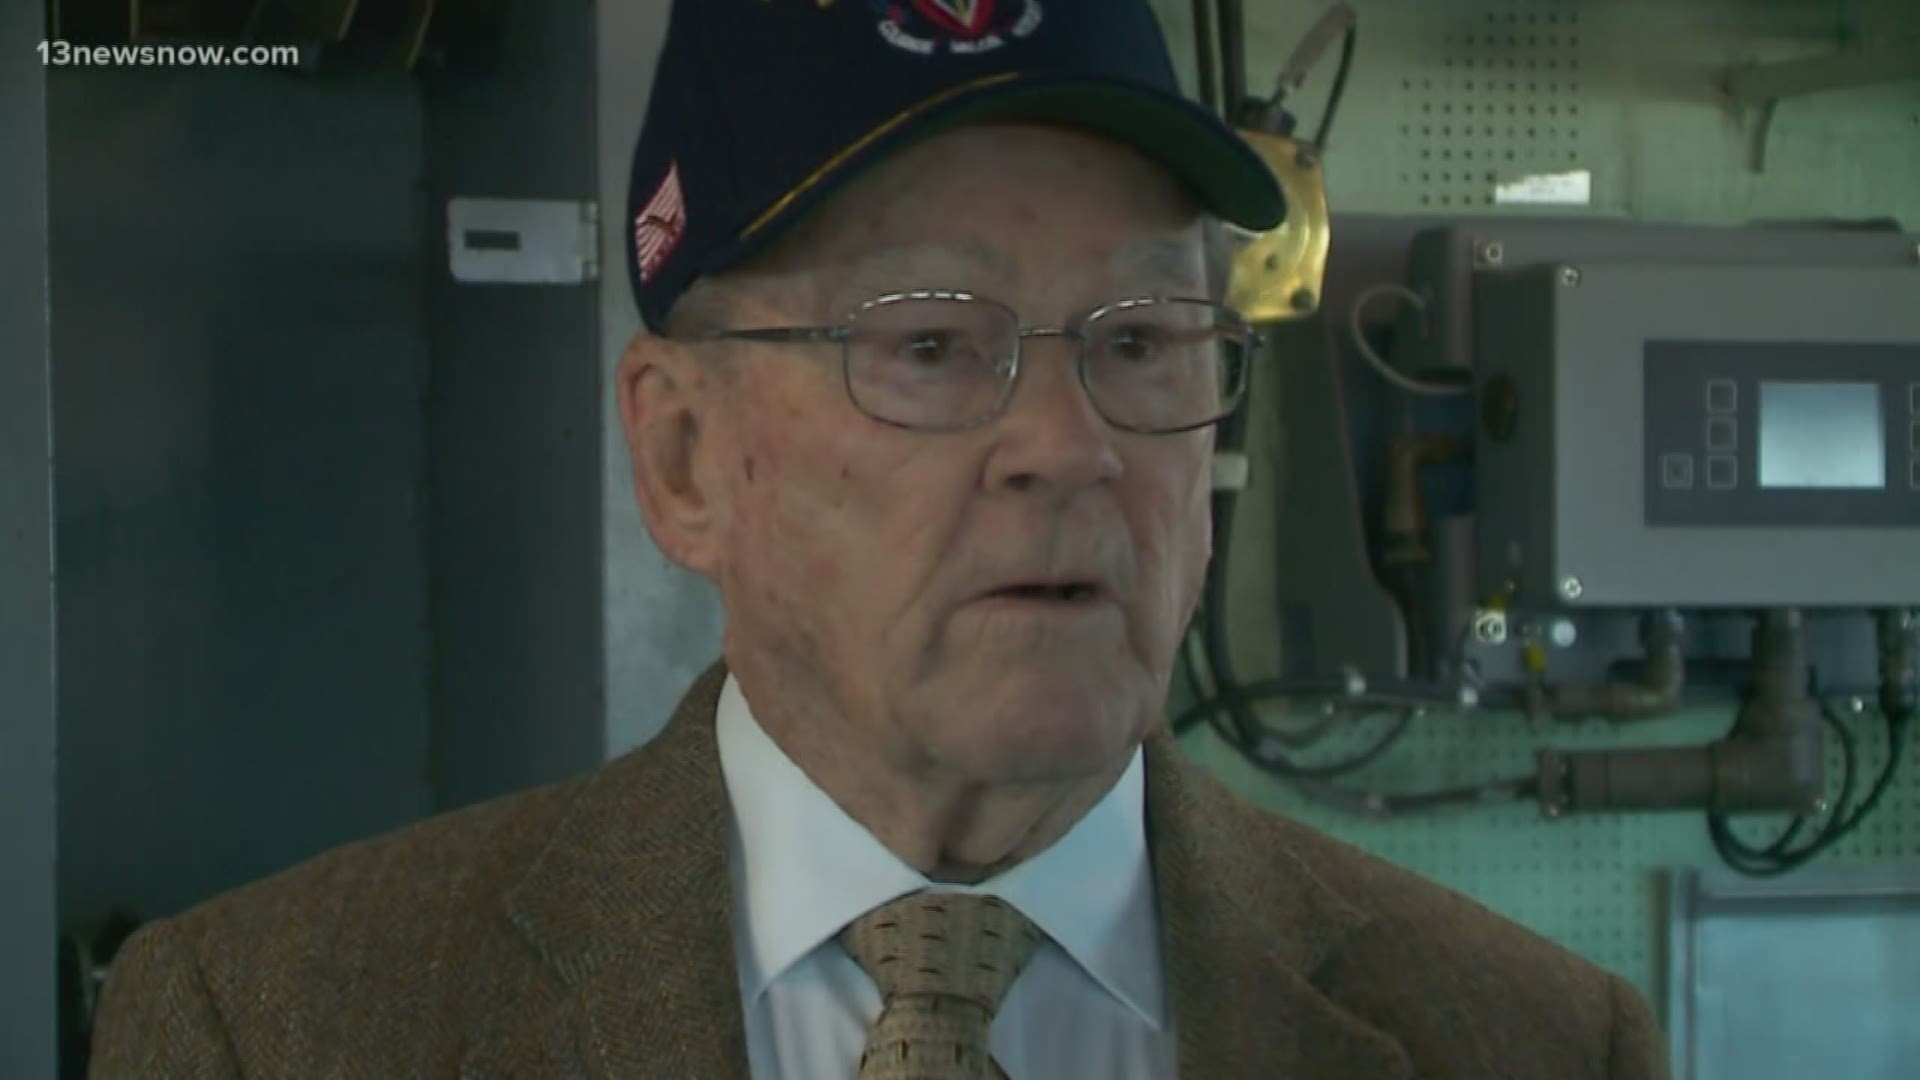 It's been 53 years since 94-year-old Dick Hanley commanded a United States Navy Destroyer. Hanley got to relive his dream aboard the USS Stout.